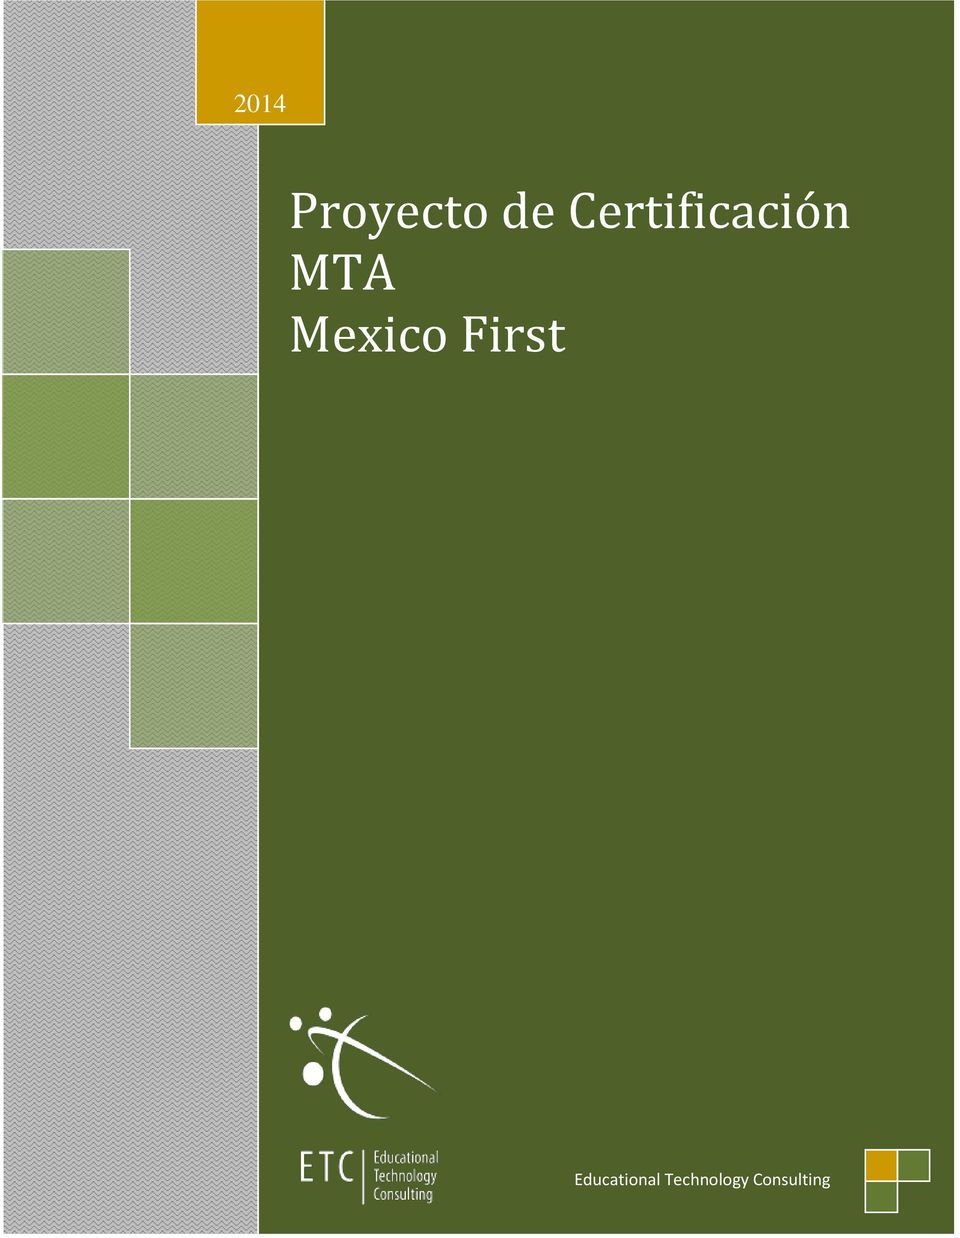 Mexico First